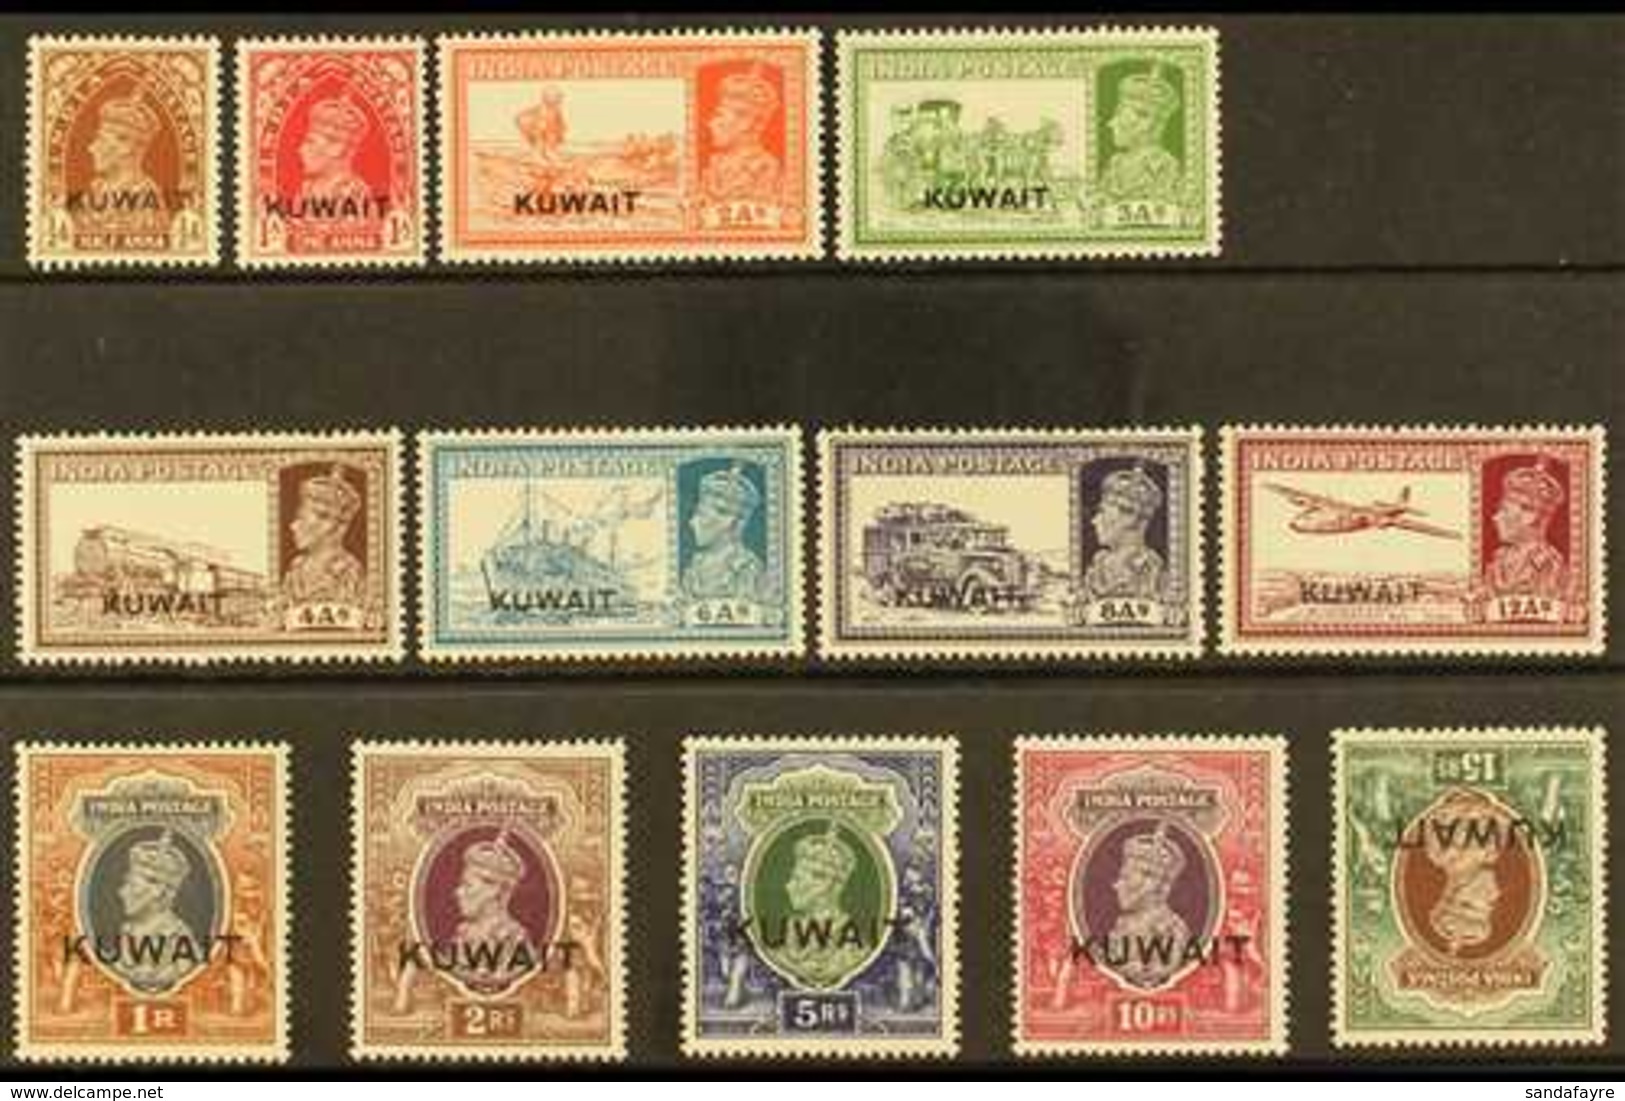 1939 KGVI Opt'd "Kuwait" Definitive Set, SG 36/51w, Fine Mint, 15r With Inverted Watermark & Light Gum Bend (13 Stamps)  - Koeweit